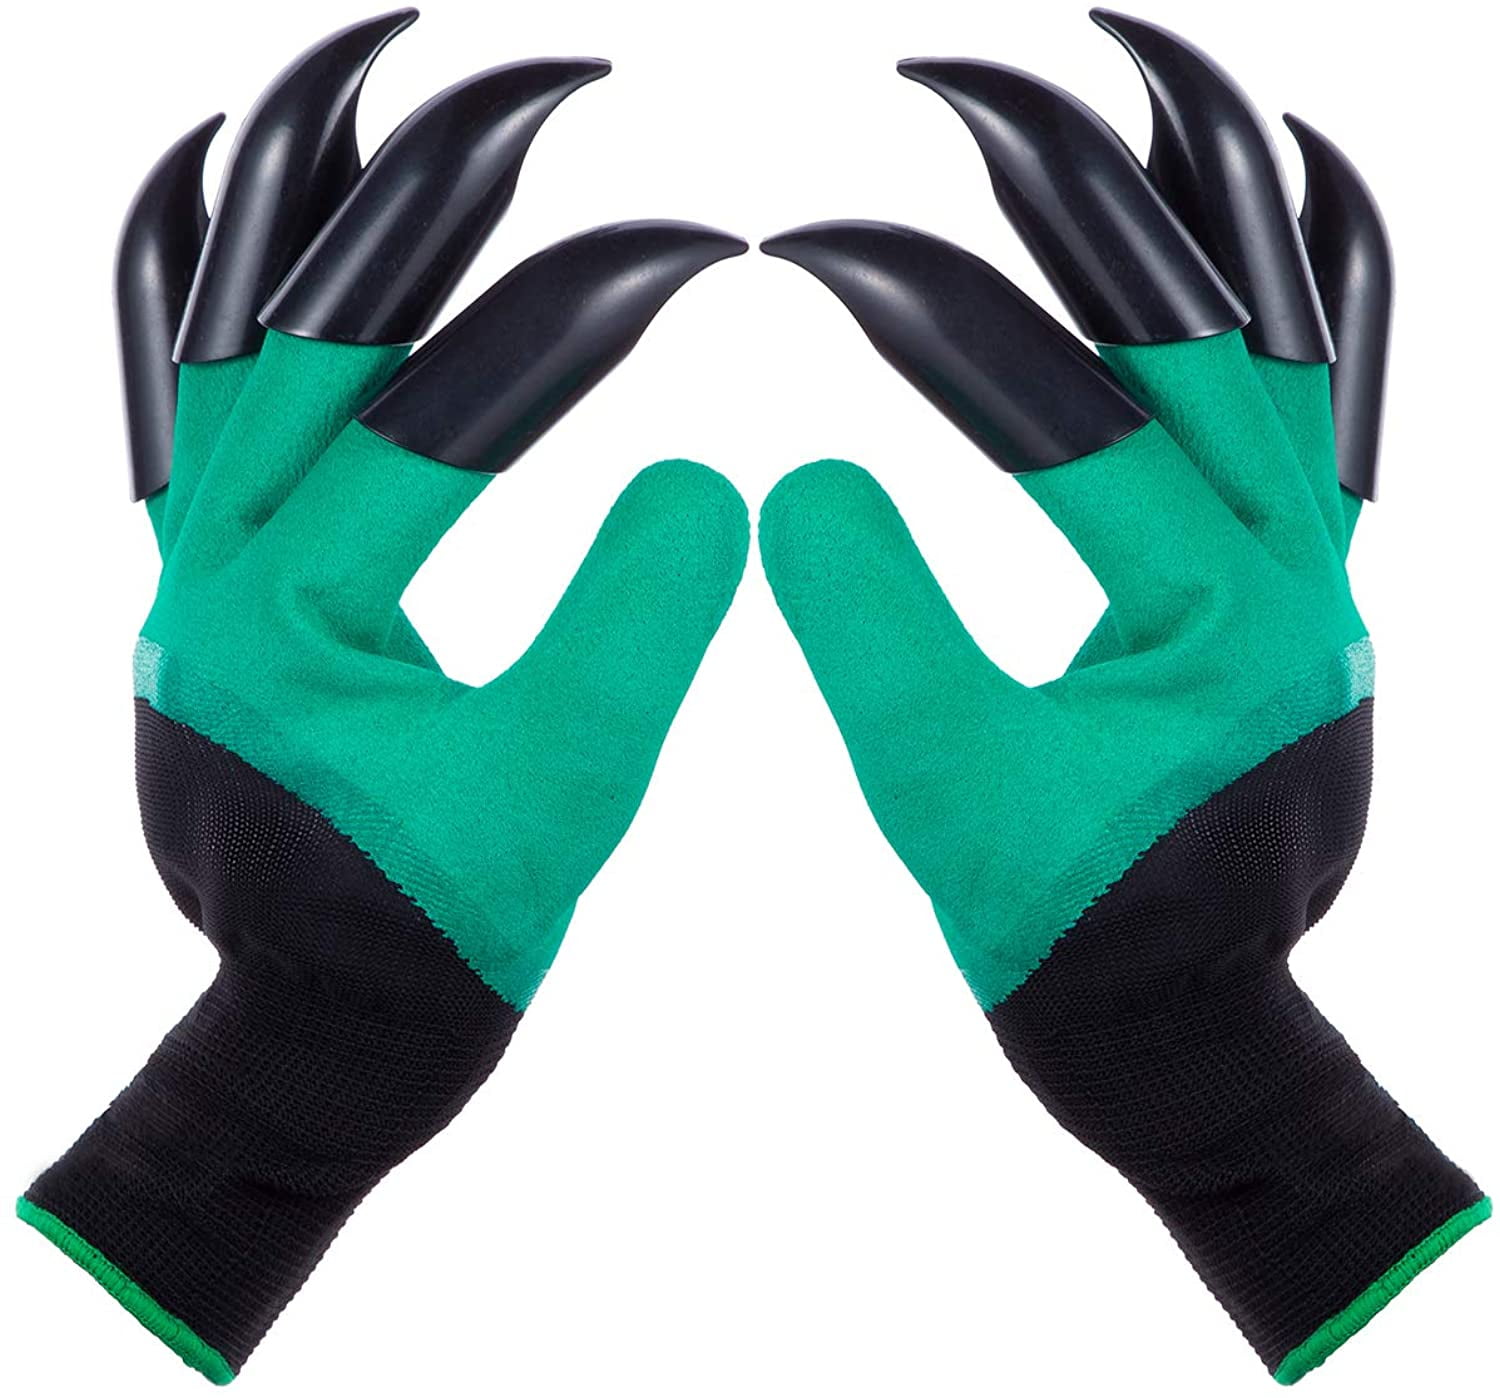 Garden Gloves Unisex One Size With Built In Claws For Easy Digging Genie Style 